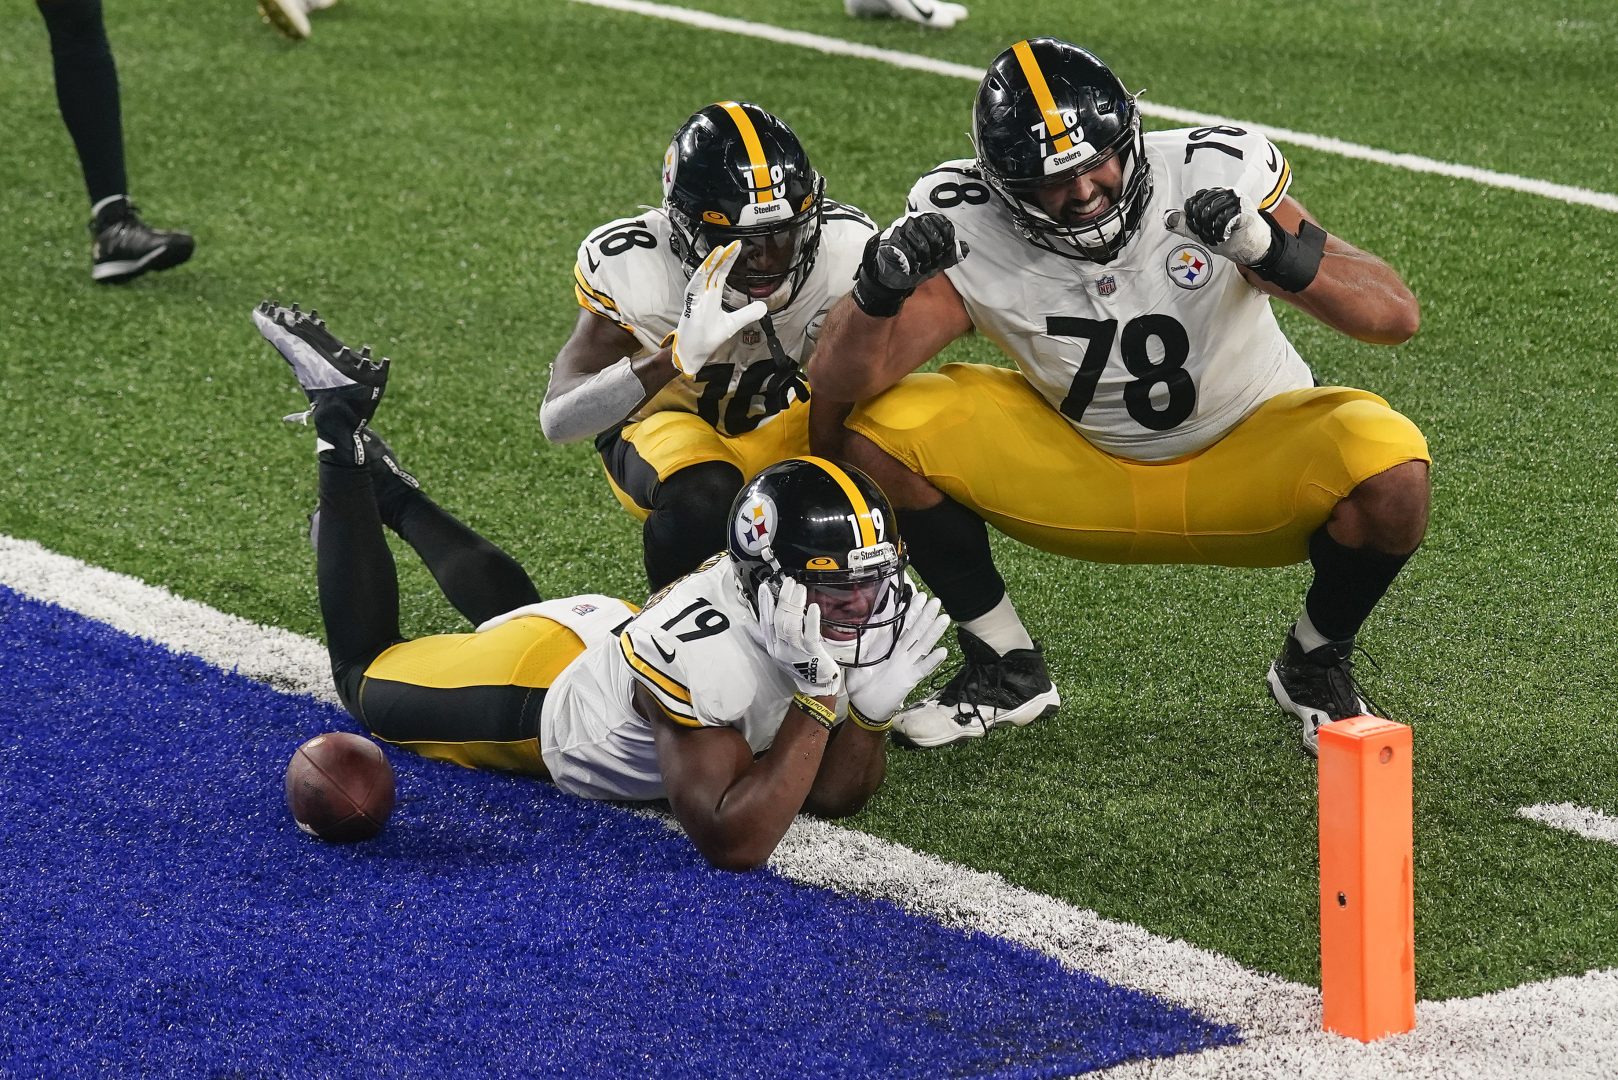 Pittsburgh Steelers wide receiver JuJu Smith-Schuster (19) offensive tackle Alejandro Villanueva (78) and wide receiver Diontae Johnson (18) celebrate after Smith-Schuster scored a touchdown against the New York Giants during the fourth quarter of an NFL football game Monday, Sept. 14, 2020, in East Rutherford, N.J. 